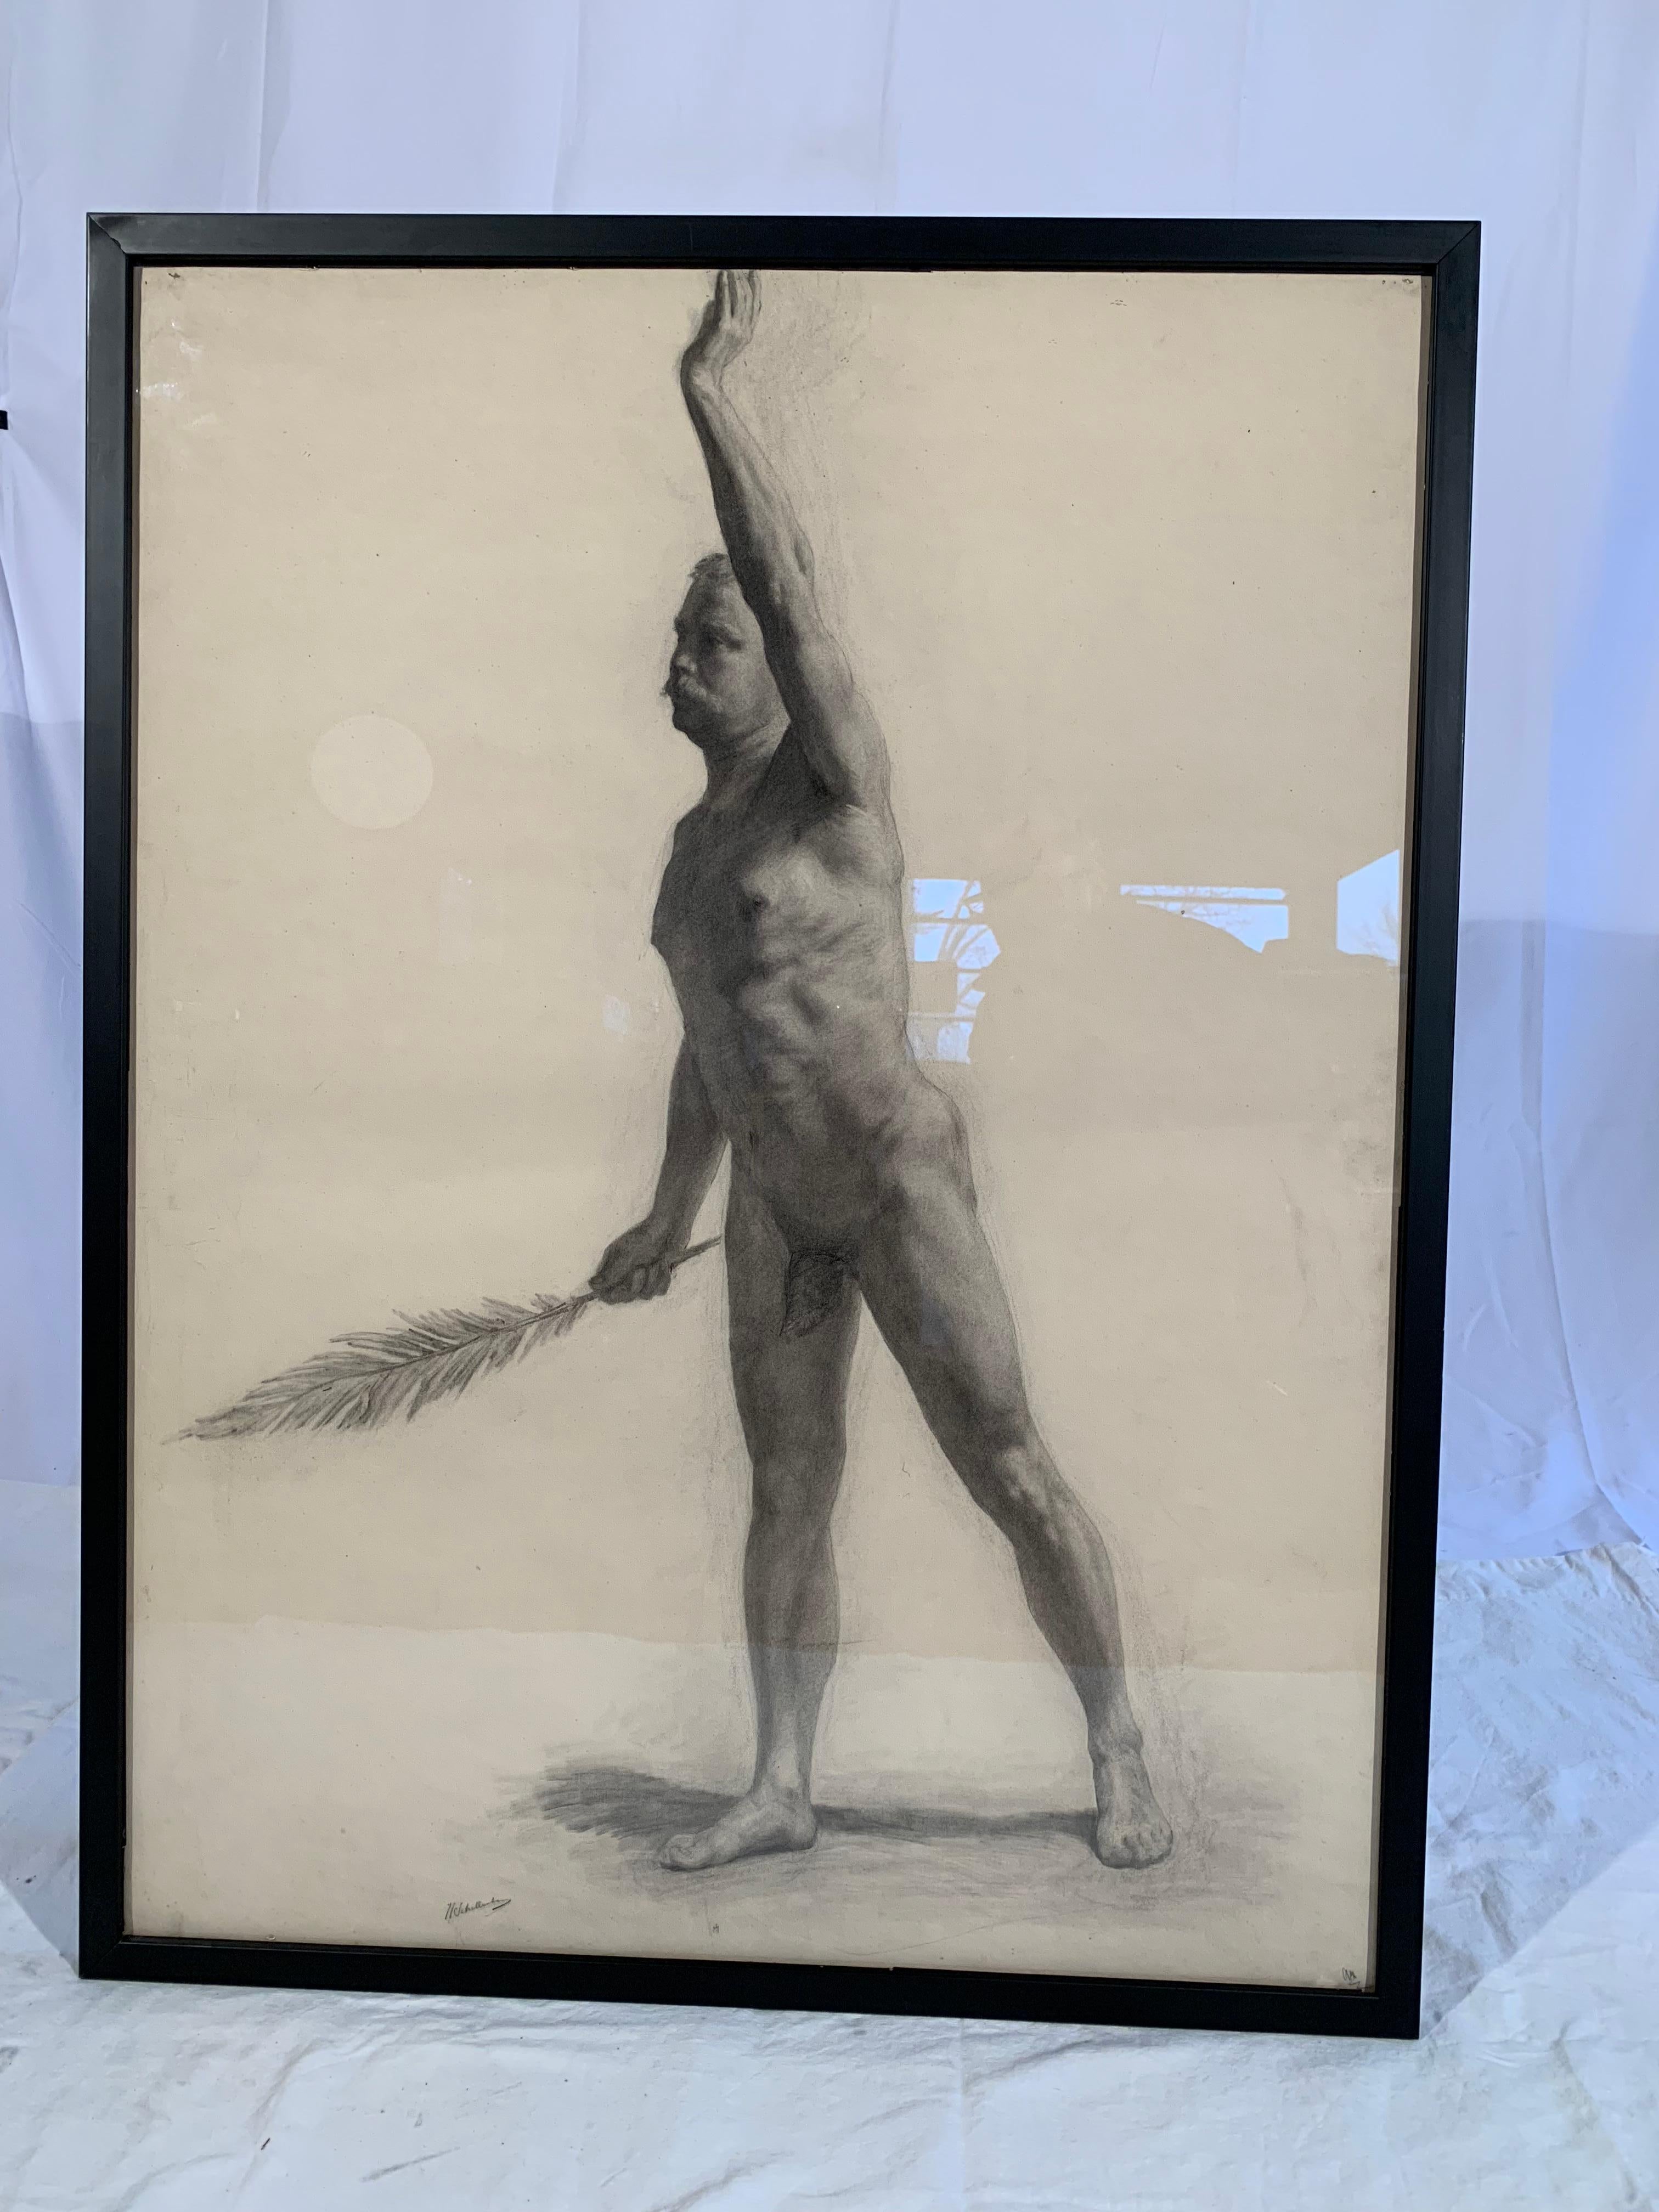 A fantastic pair of male nude drawings, sold separately, by Hermanus Schellenberg, 1923.
The pair of charcoal drawings are signed by the artist. Included is information on the artist. Both drawings are framed and ready to hang. They are not the